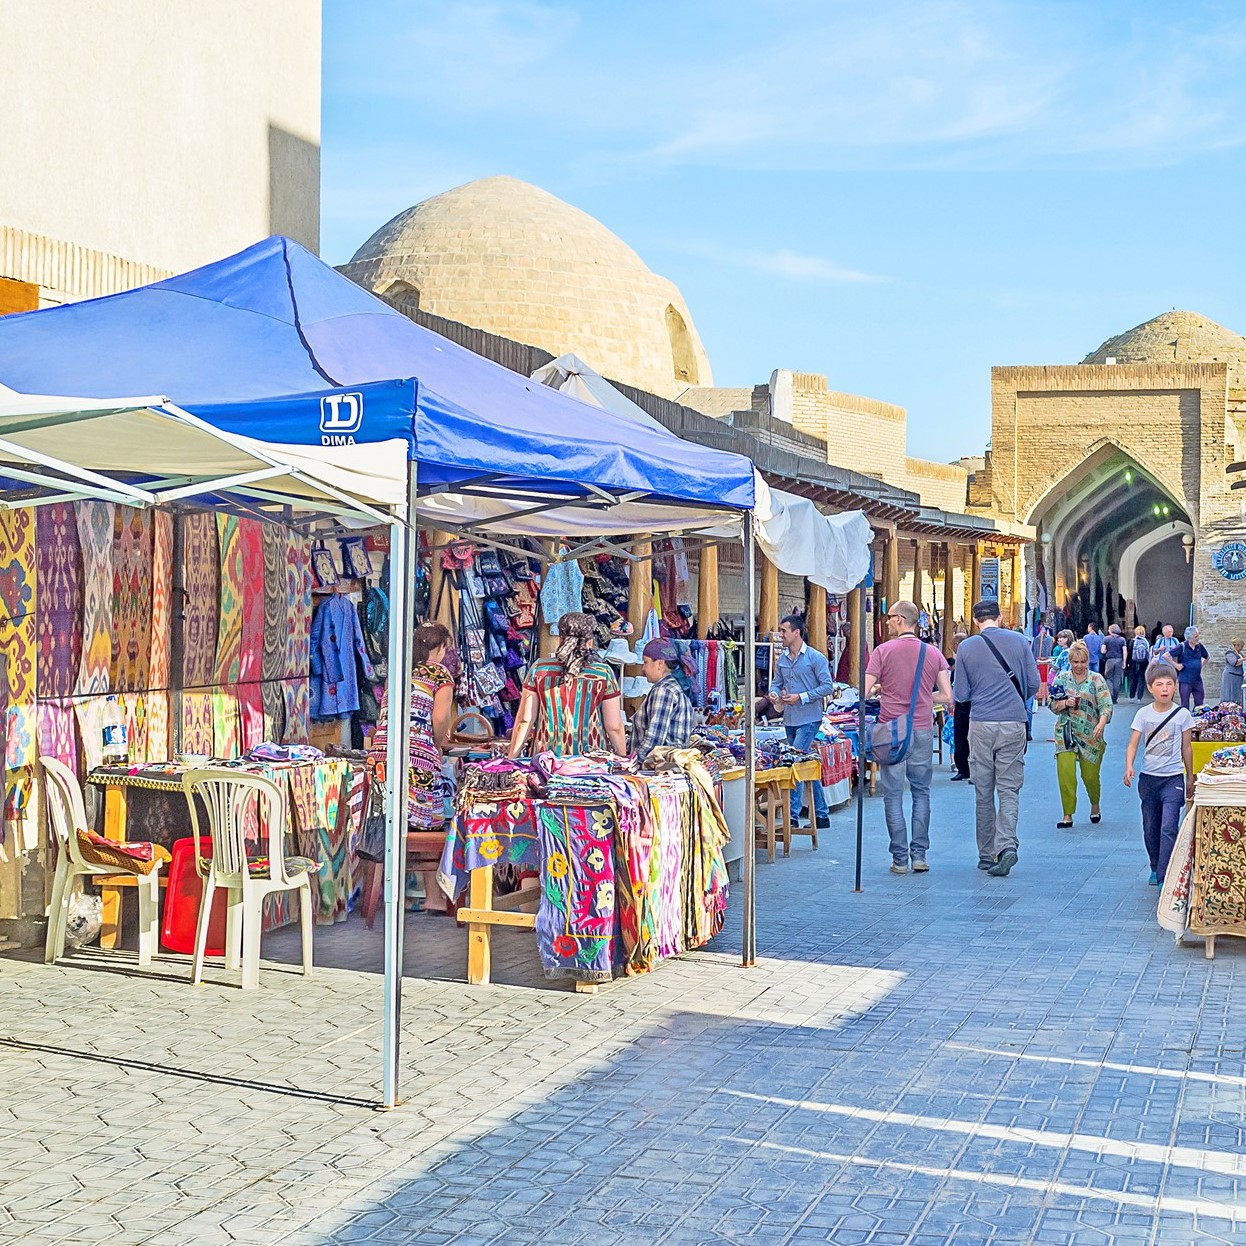 BUKHARA, UZBEKISTAN - APRIL 28, 2015: The large tourist market in the old town, on April 28 in Bukhara.